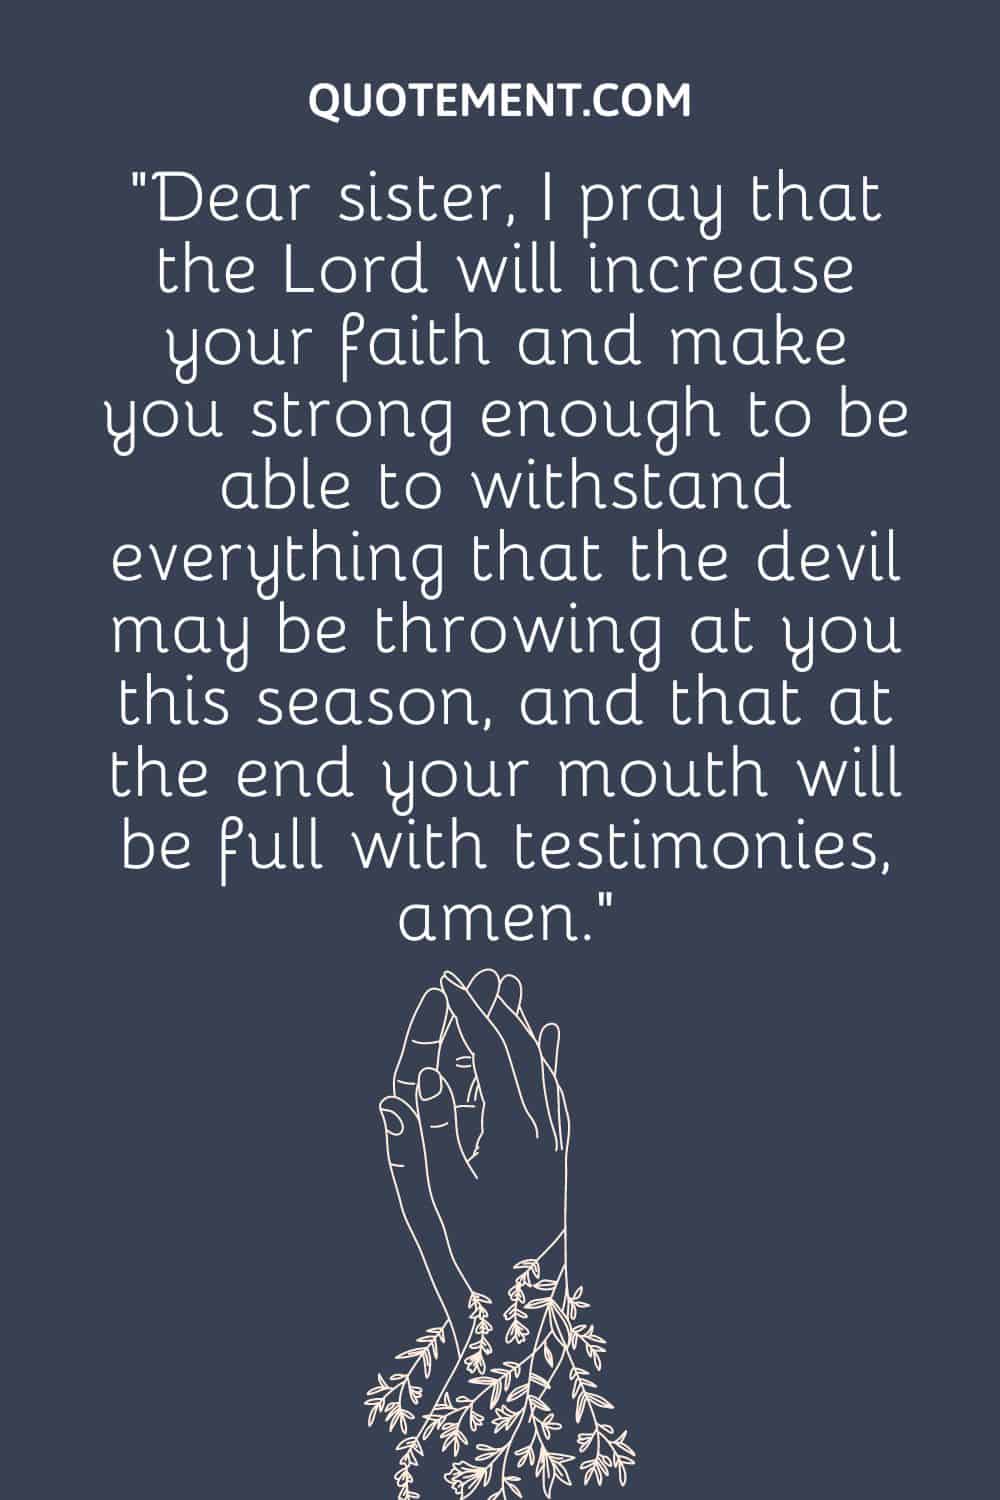 “Dear sister, I pray that the Lord will increase your faith and make you strong enough to be able to withstand everything that the devil may be throwing at you this season,